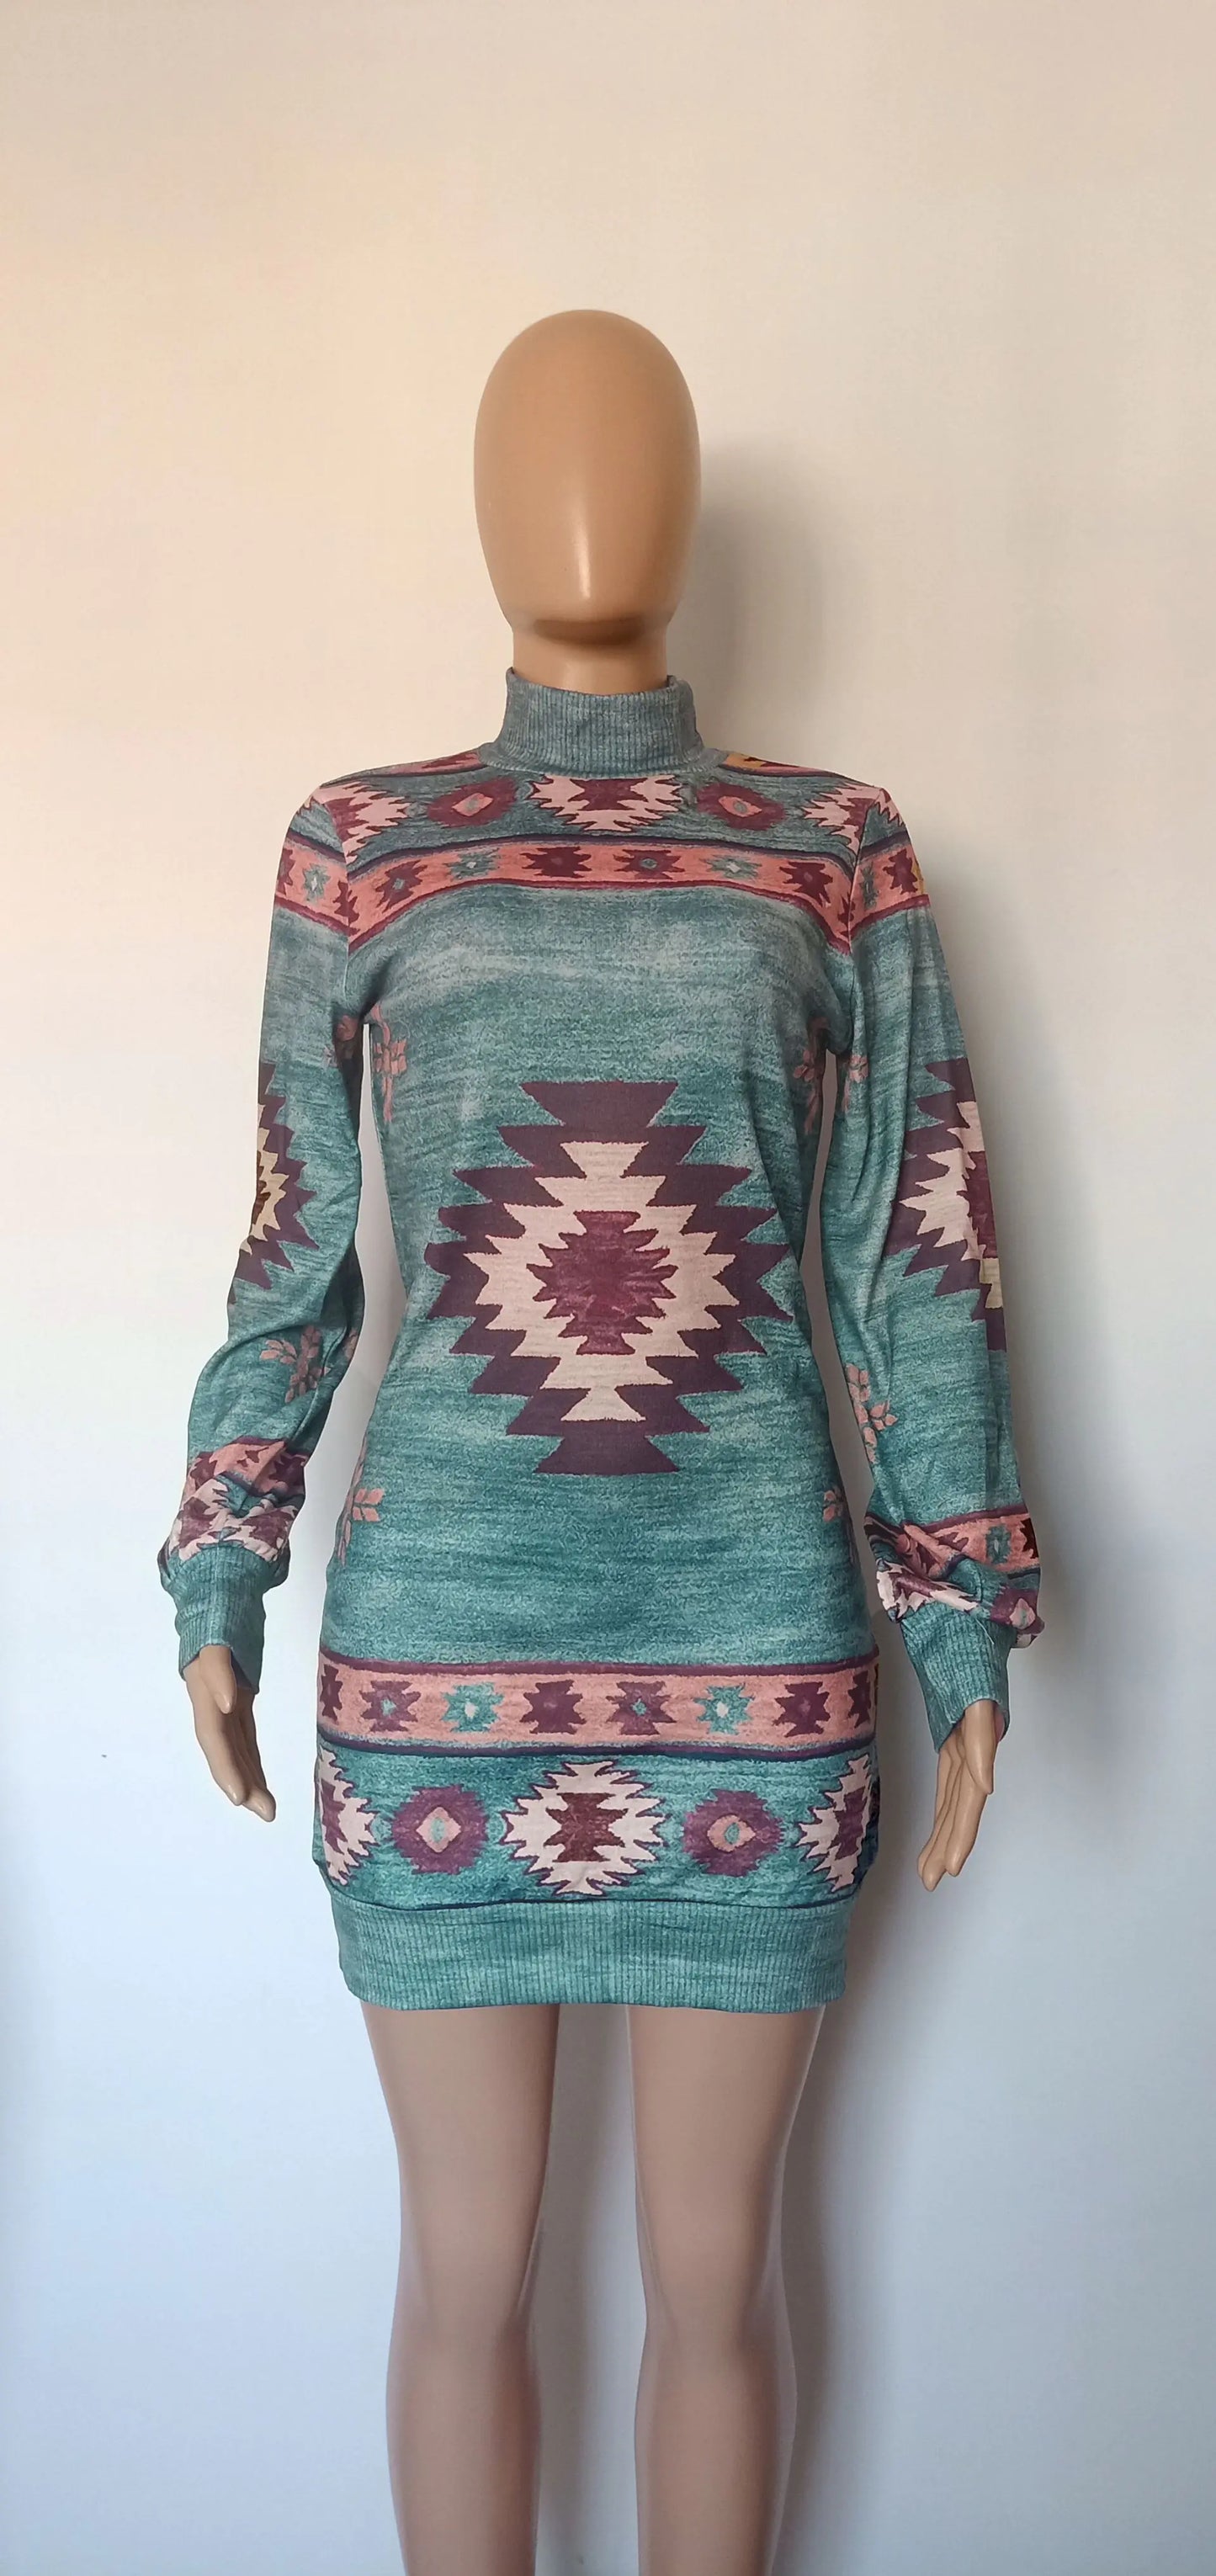 Bohemian Print Mini Dress for Women - Long Sleeve, Skinny Fit, Casual, for Autumn and Winter